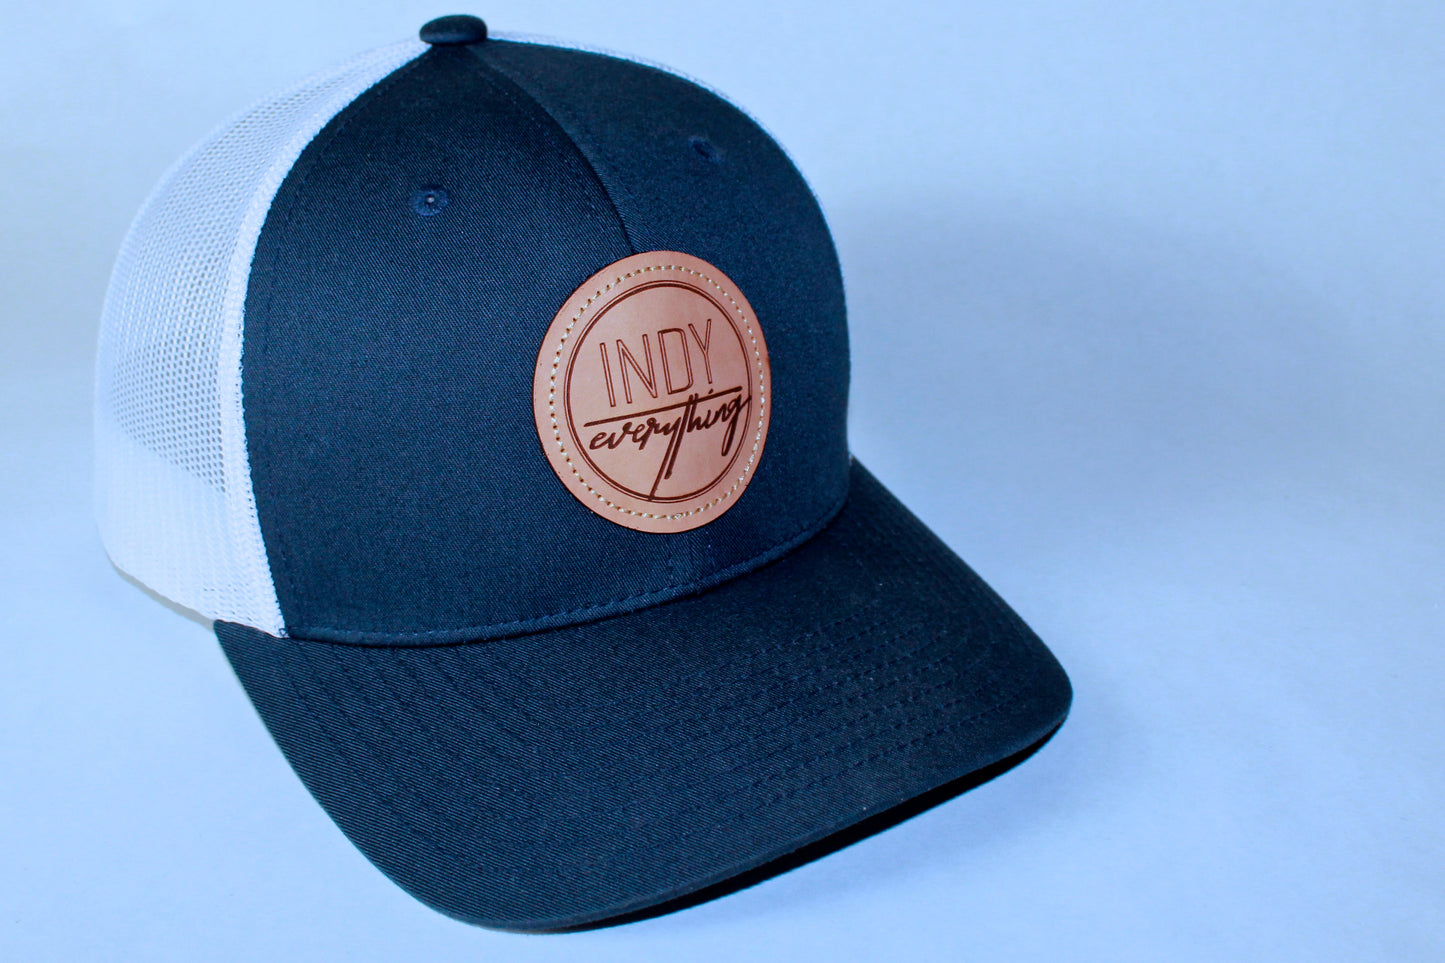 TRUCKER HAT - NAVY AND WHITE W/ LEATHER BADGE - Indy Over Everything